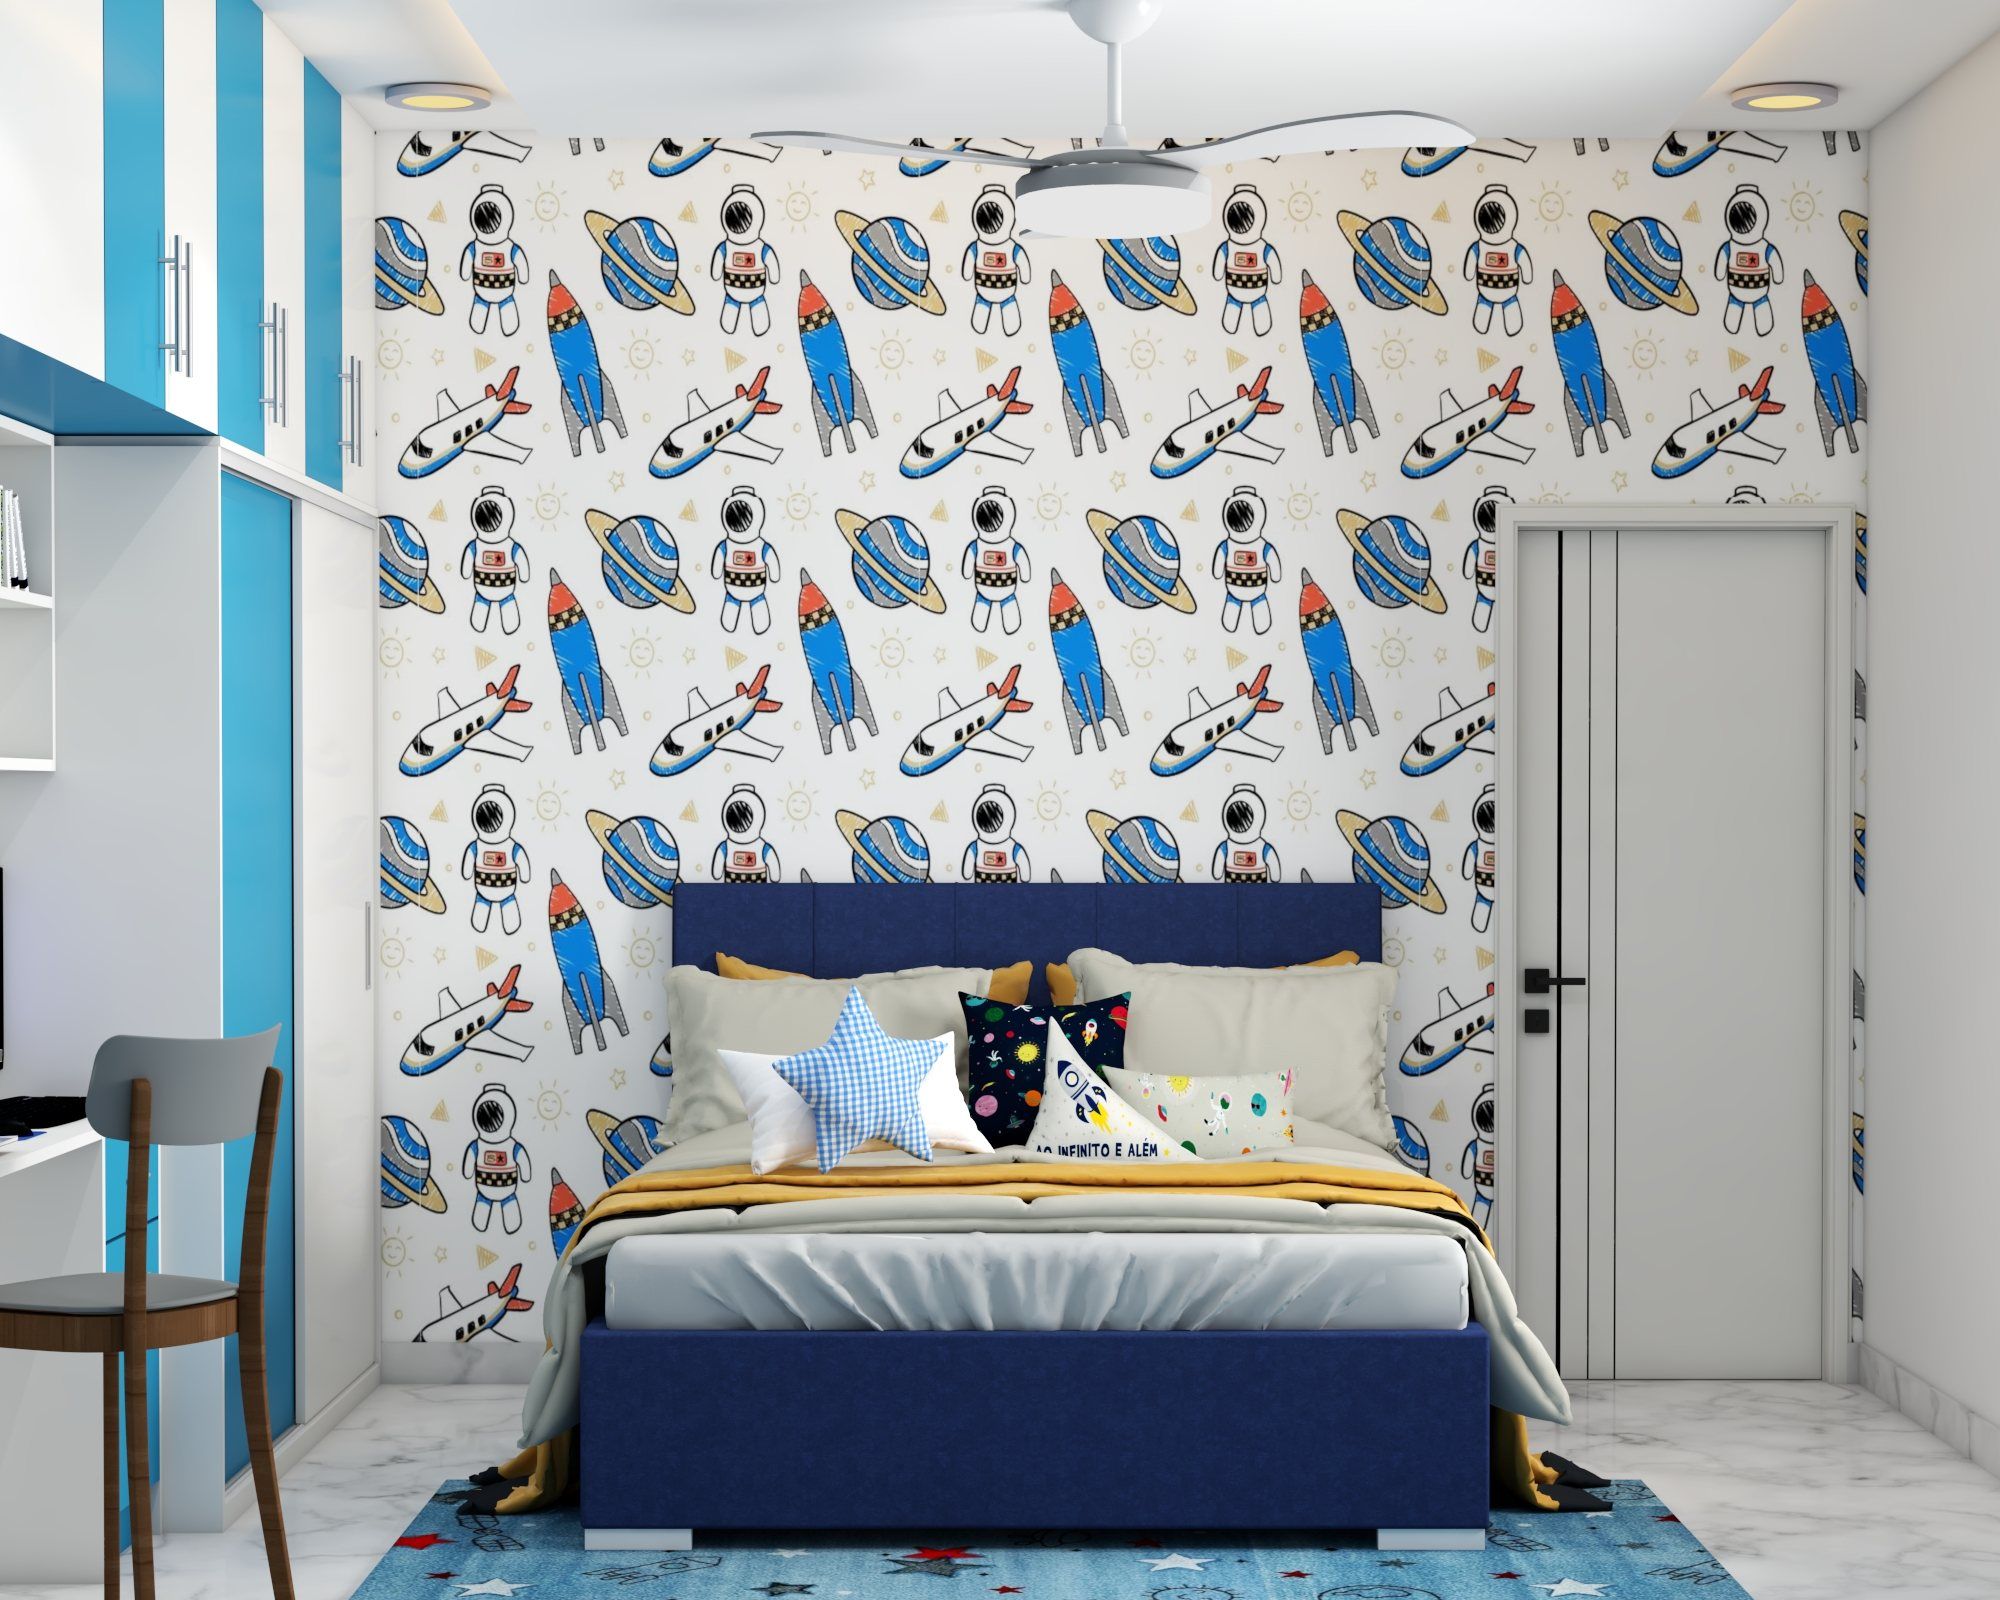 Contemporary Kids Room Design With A Double Bed With Inbuilt Storage